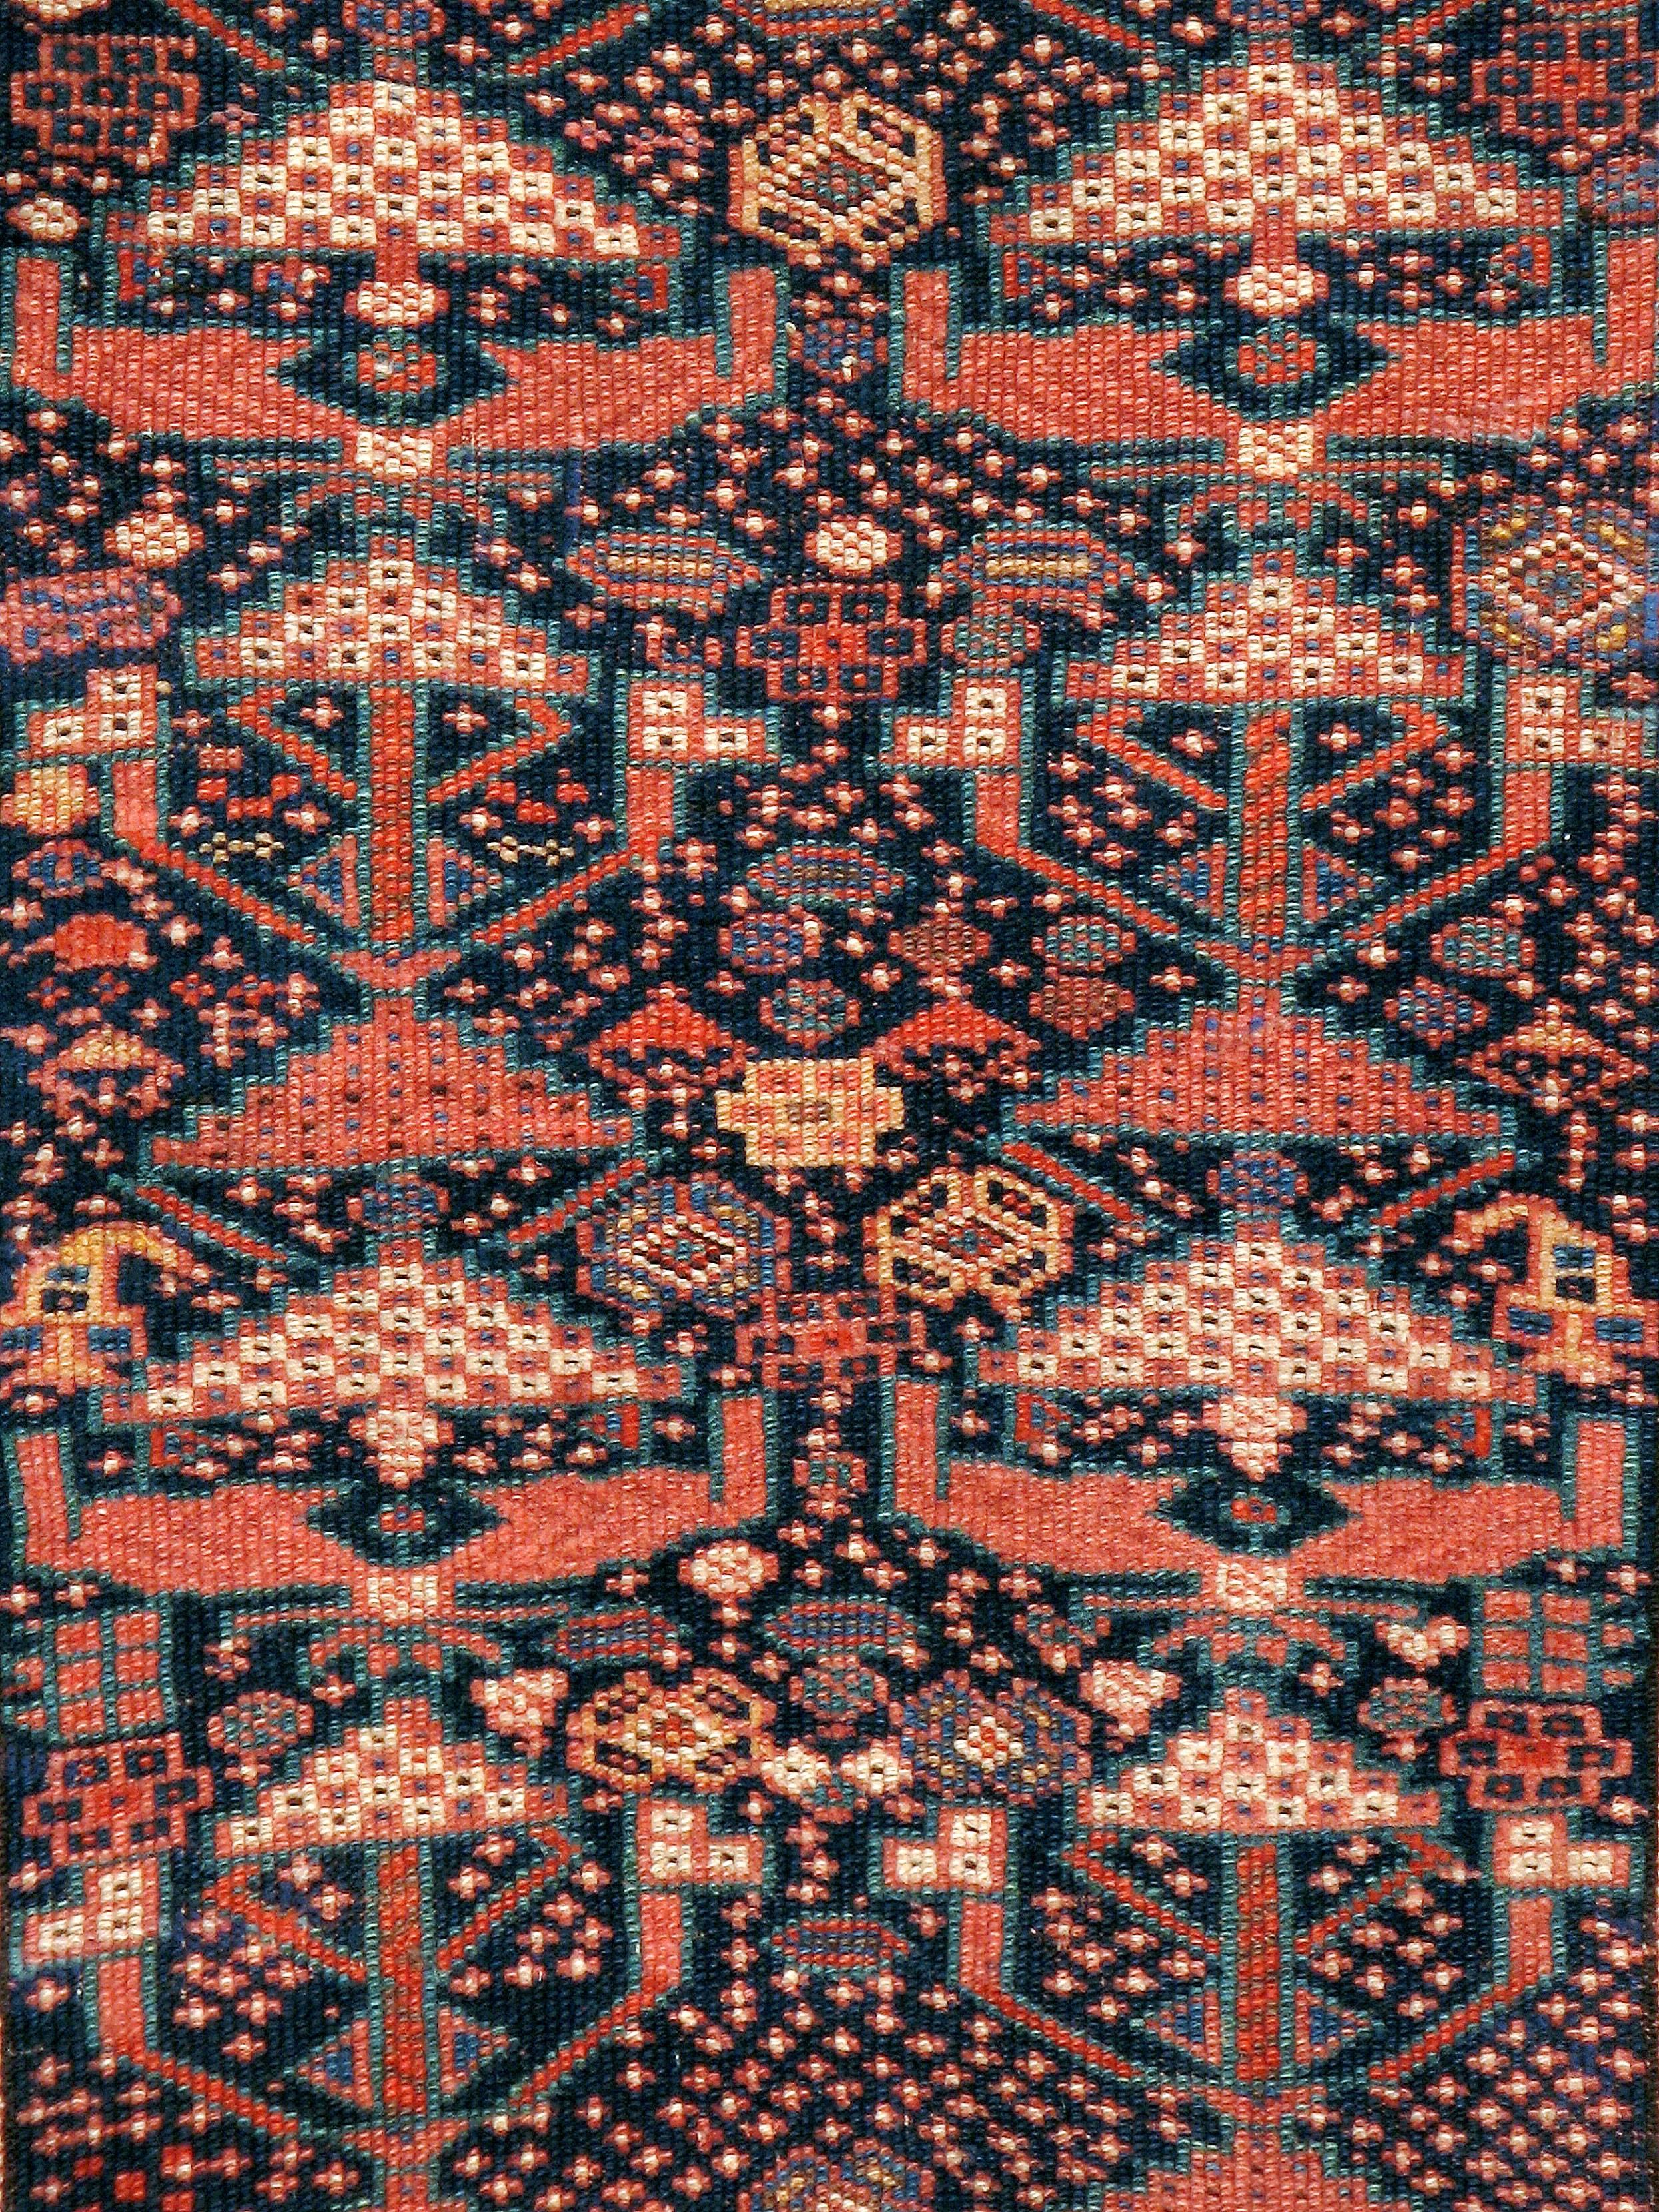 An antique Persian Shiraz carpet from the first quarter of the 20th century.